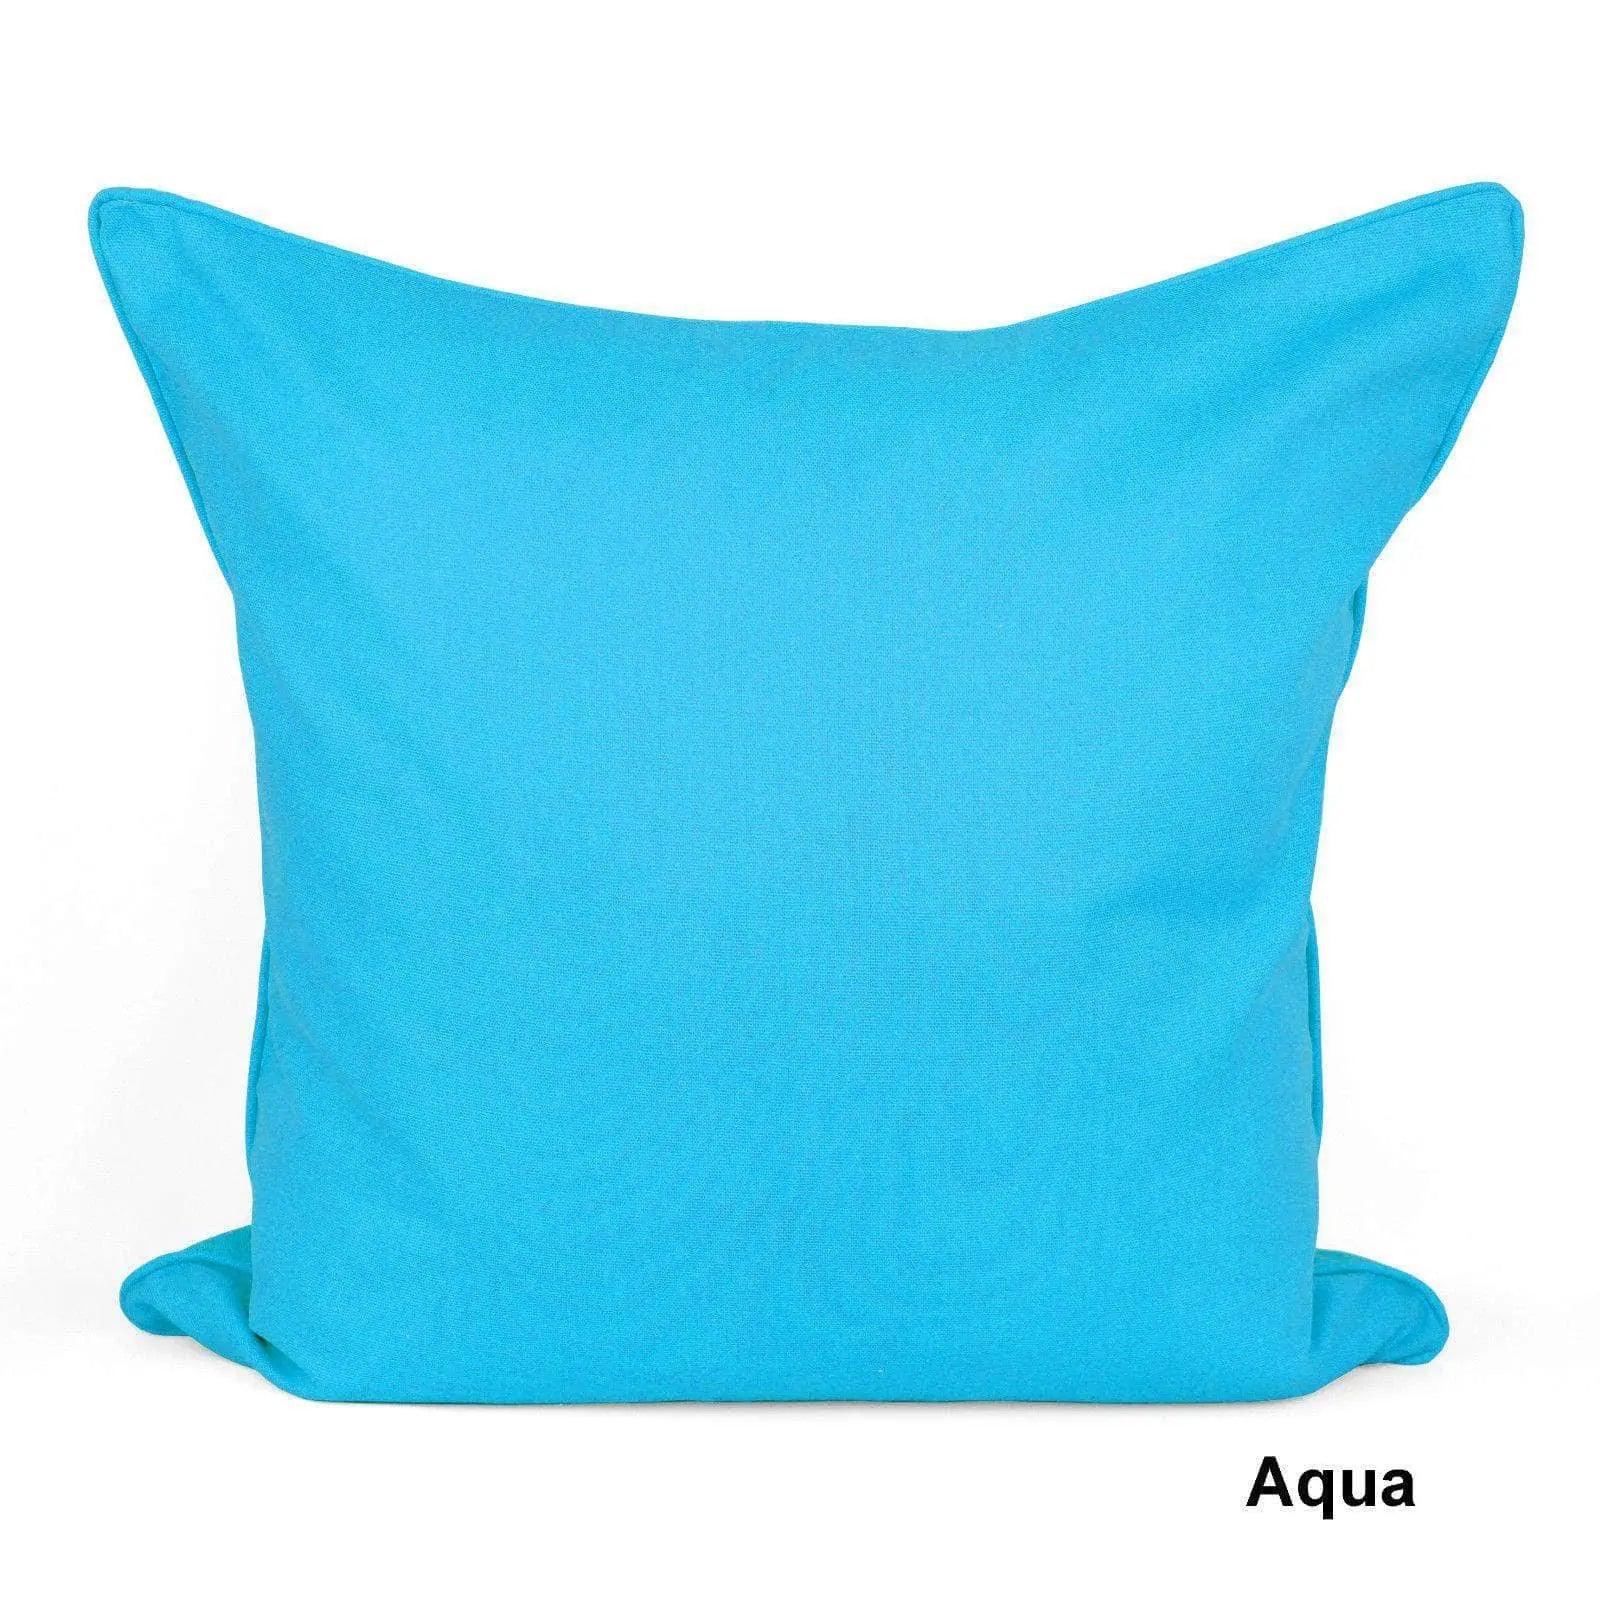 a blue pillow sitting on top of a white floor